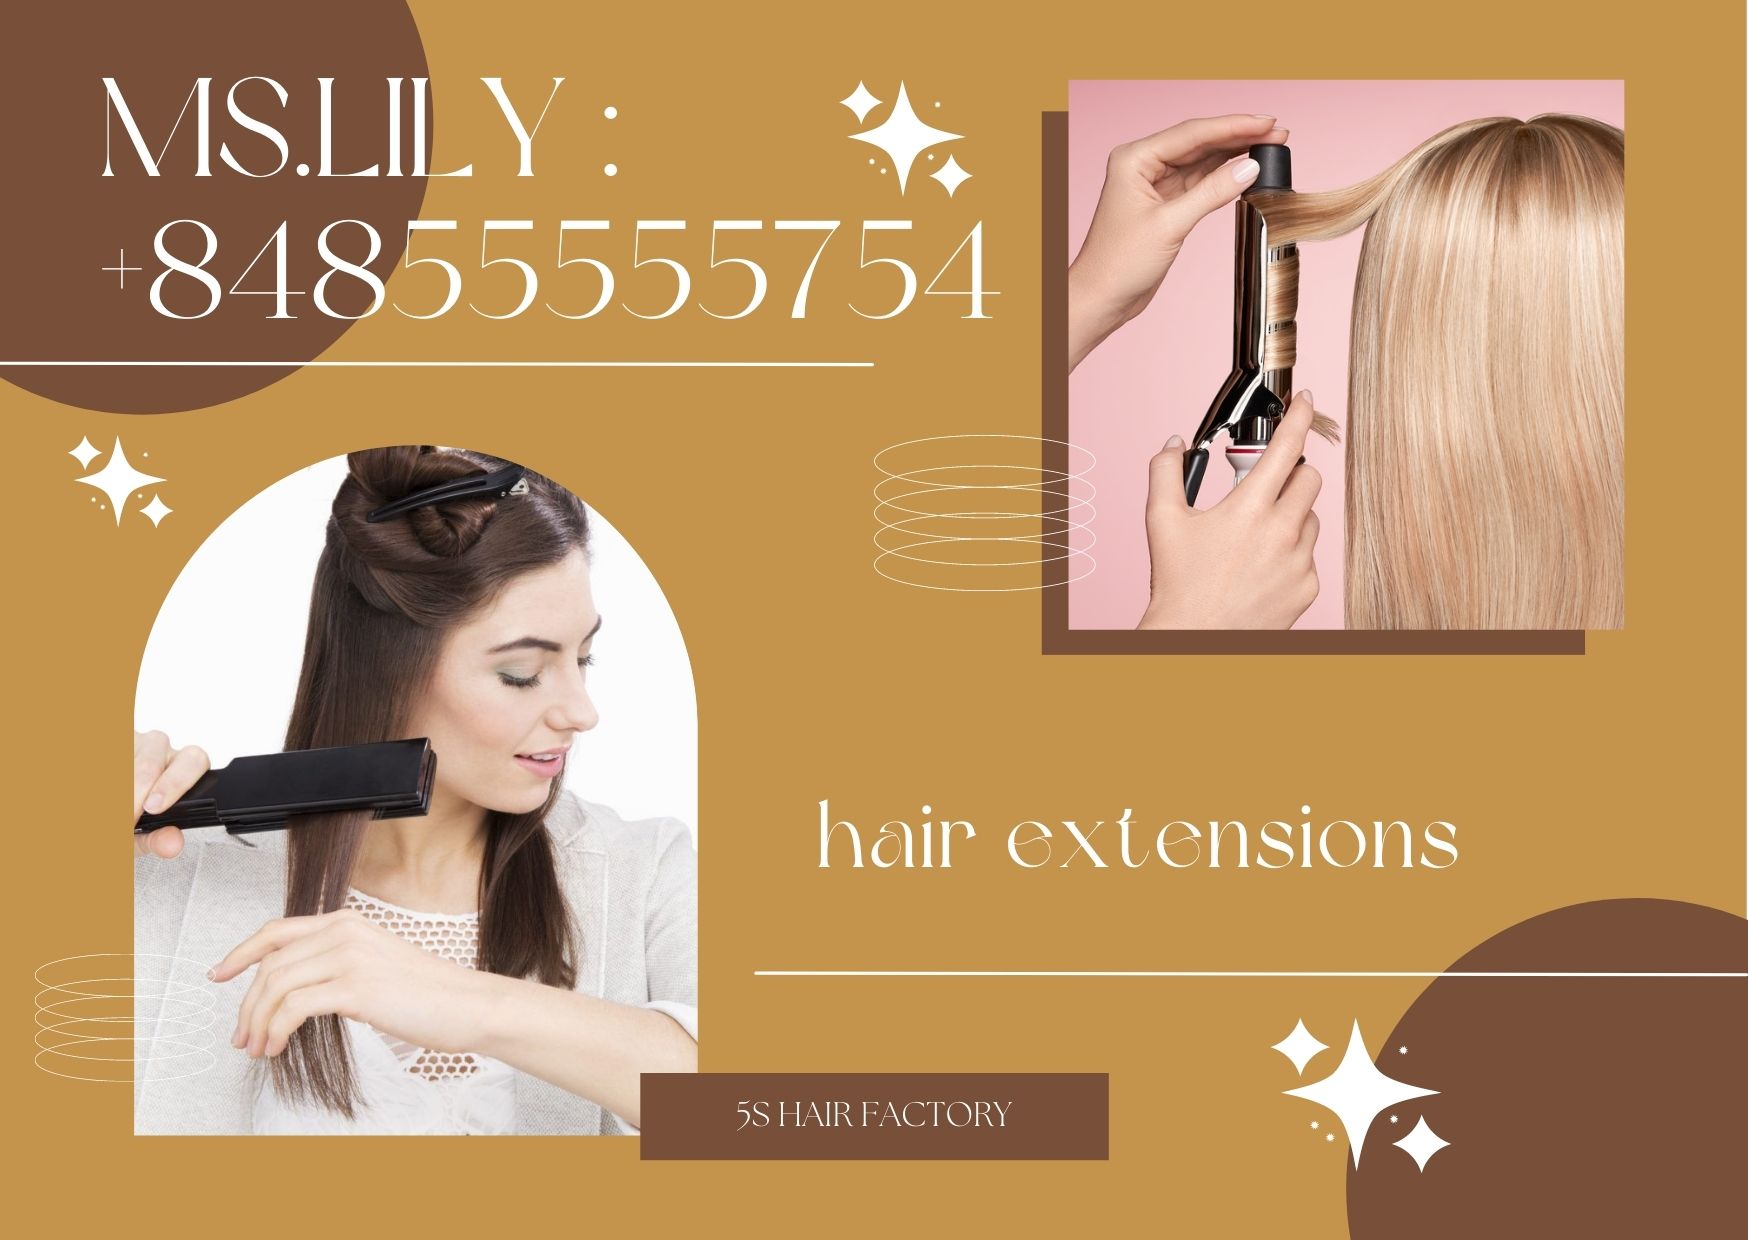 How to straighten hair extensions easily and quickly at home